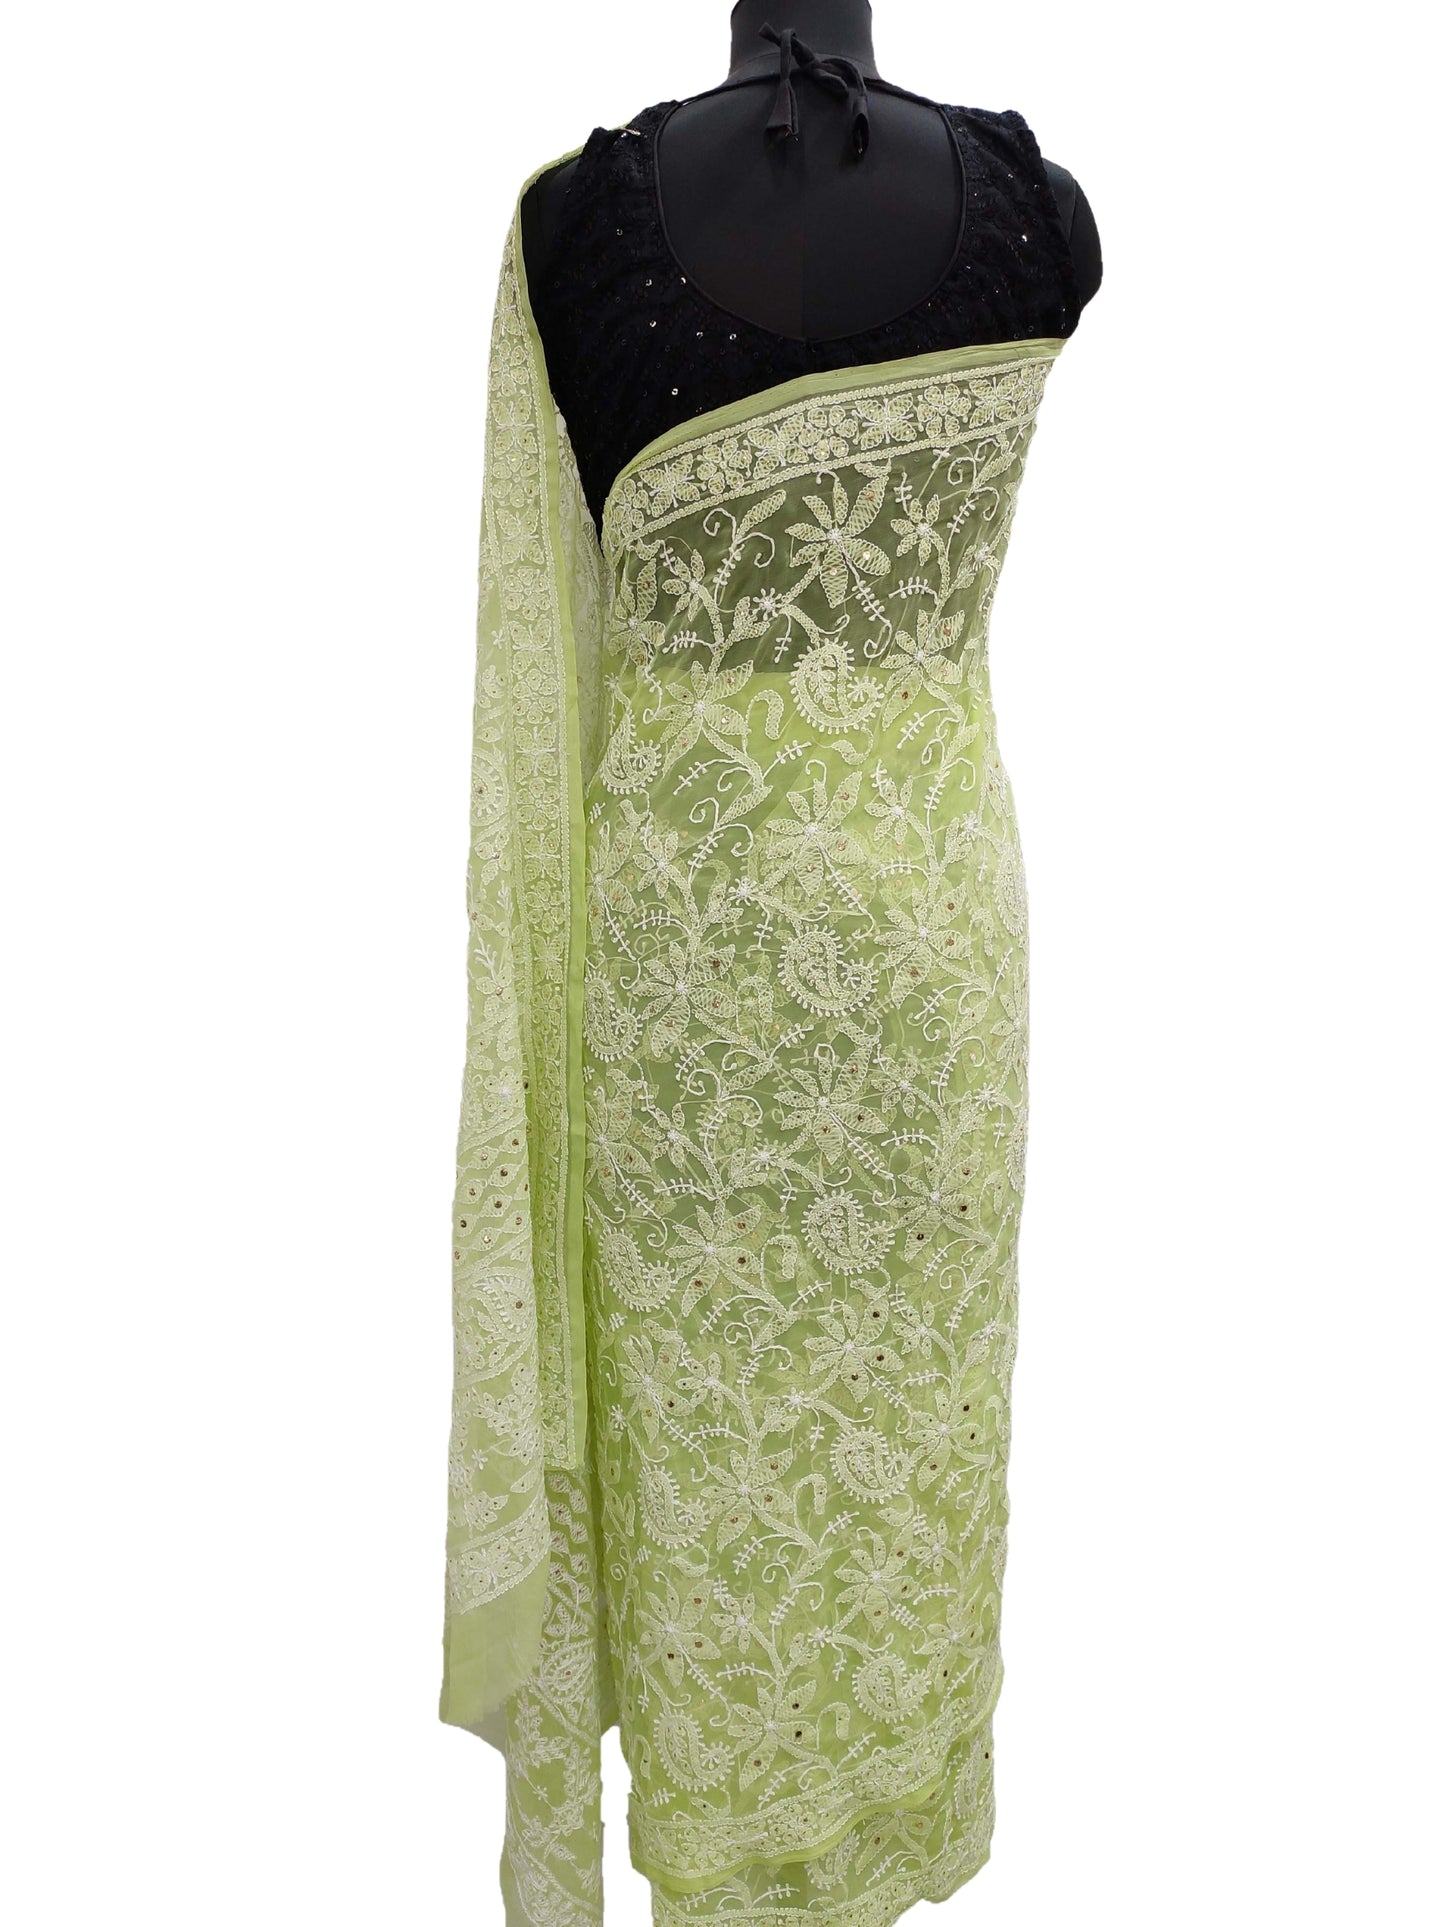 Shyamal Chikan Hand Embroidered Green High Quality Georgette Lucknowi Chikankari Full Jaal Saree With Blouse Piece And Mukaish Work - S9919